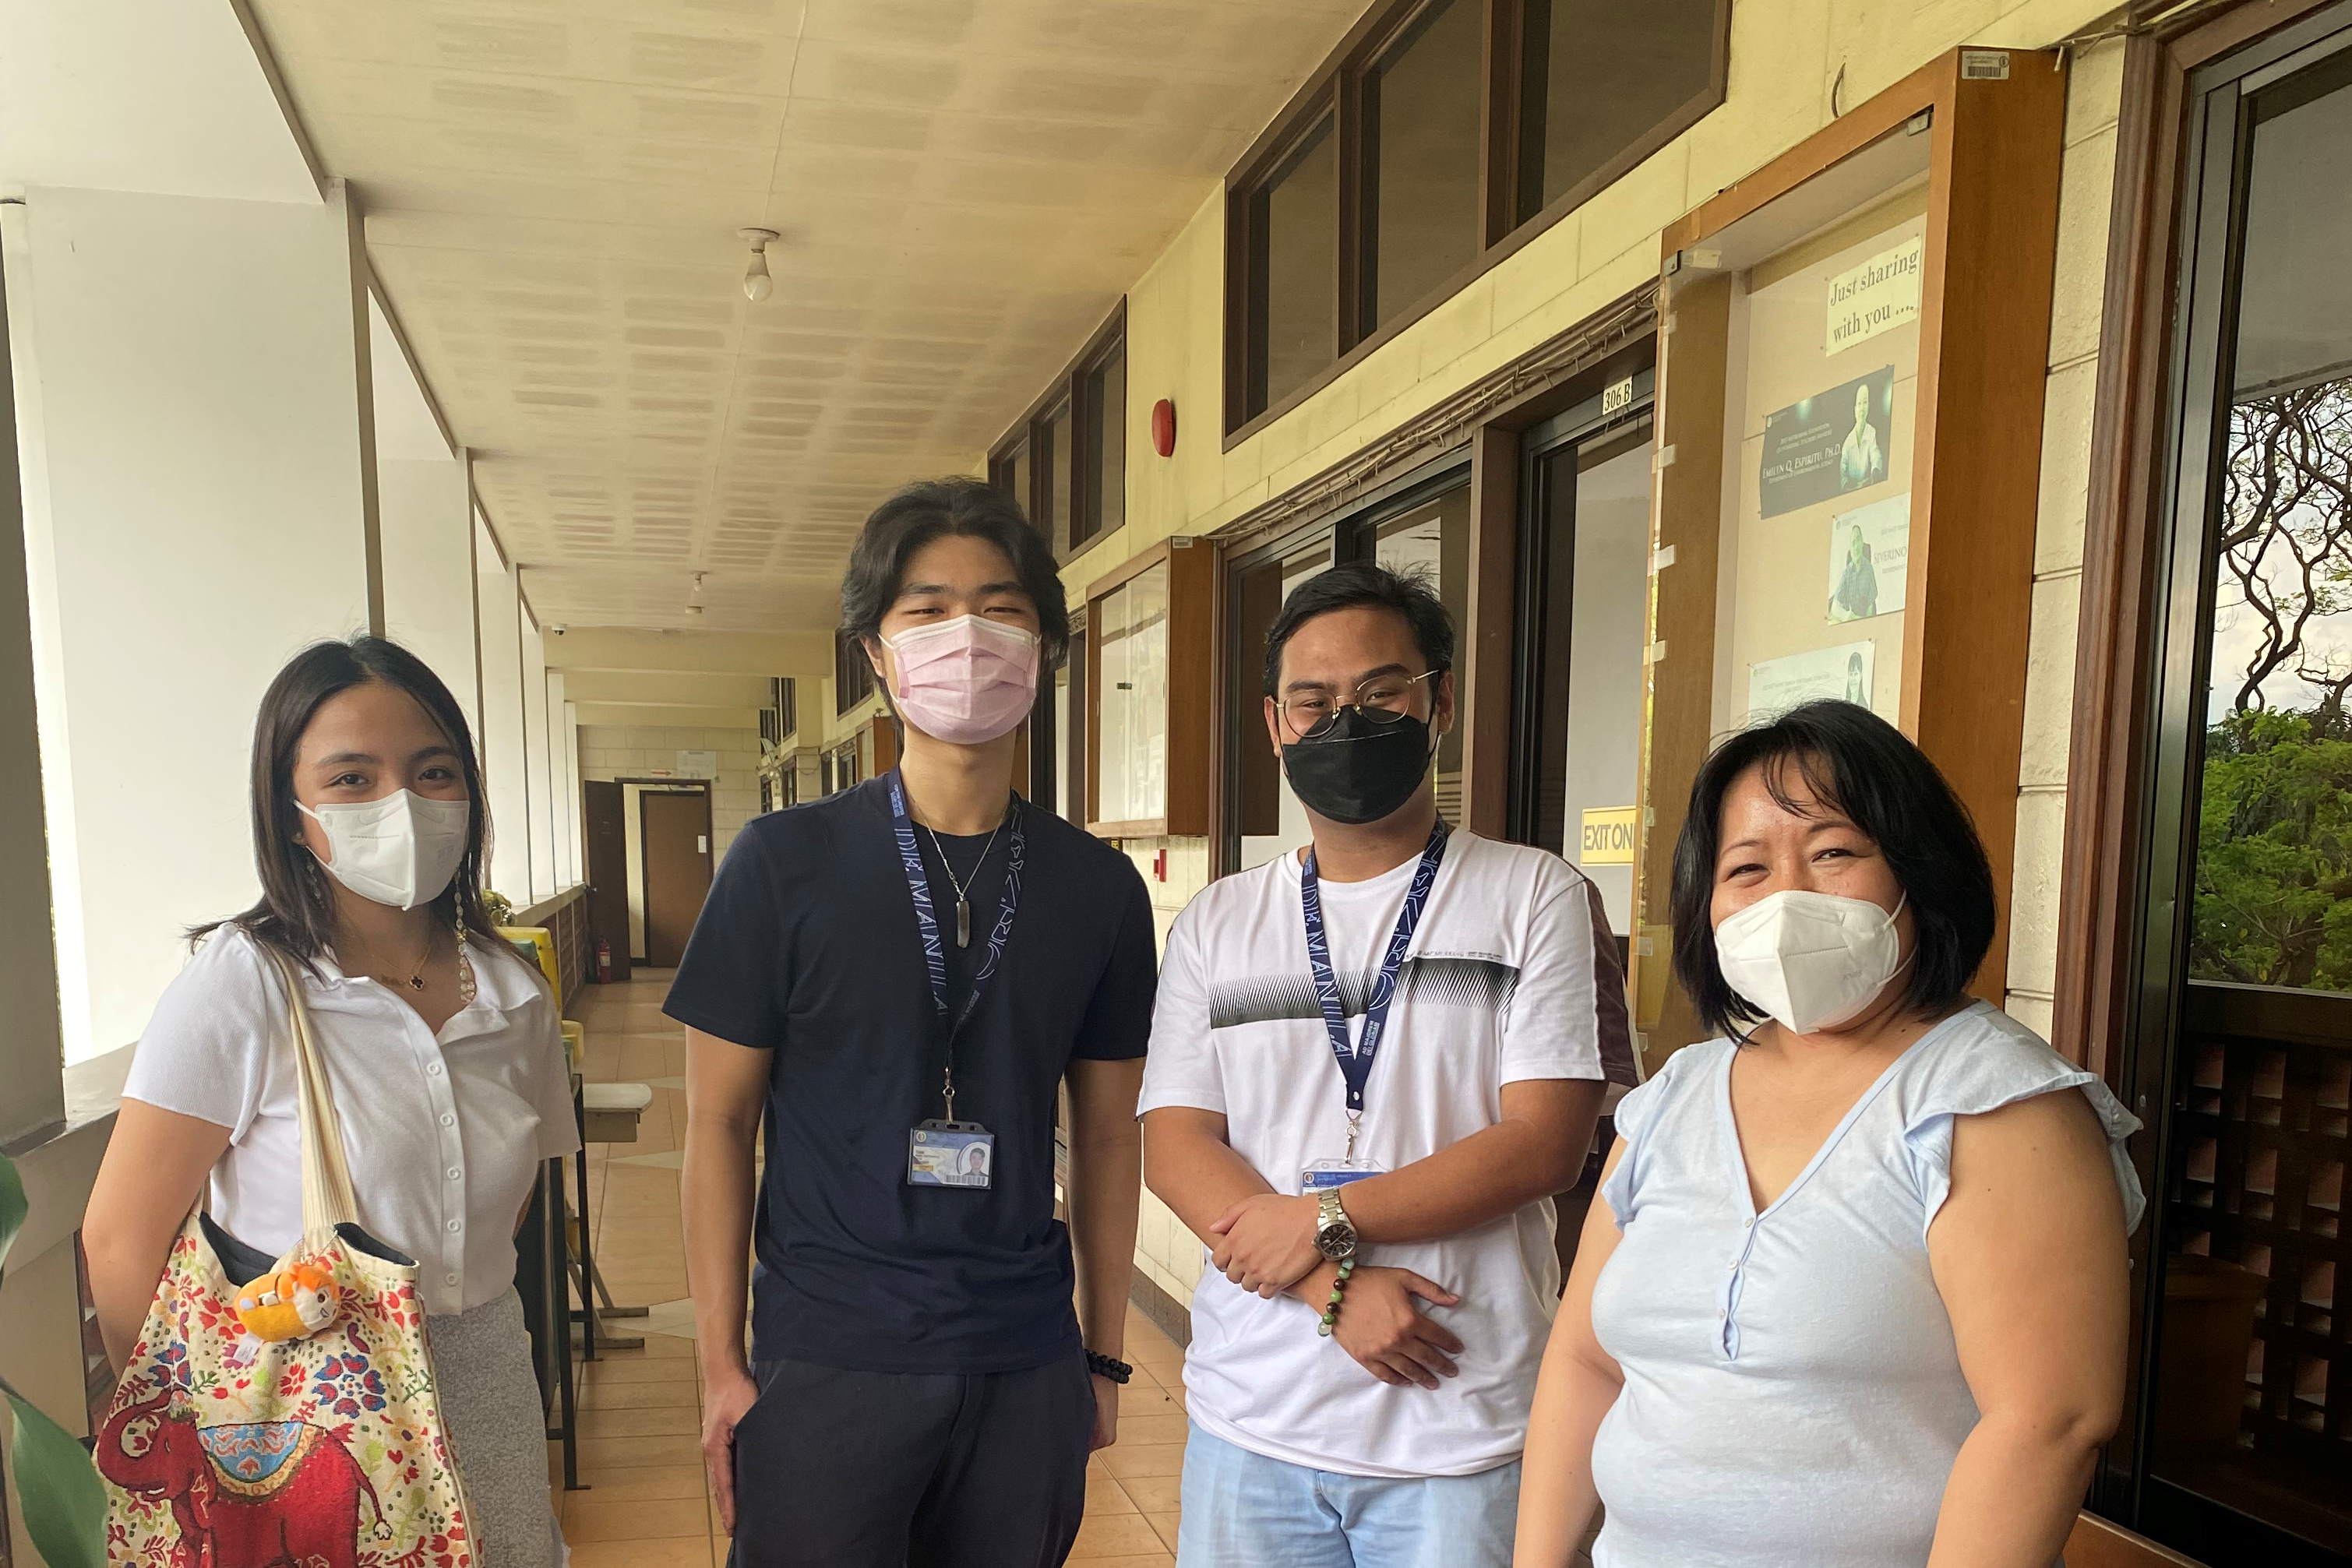 Students welcomed by Dr. Guzman and Ms. Argones. From left to right: Anika Therese Nicanor (2 BS Biology), Nigel Anthony Tan, Karl Cedric Opeña (2 BS Environmental Science), and Dr. Guzman.